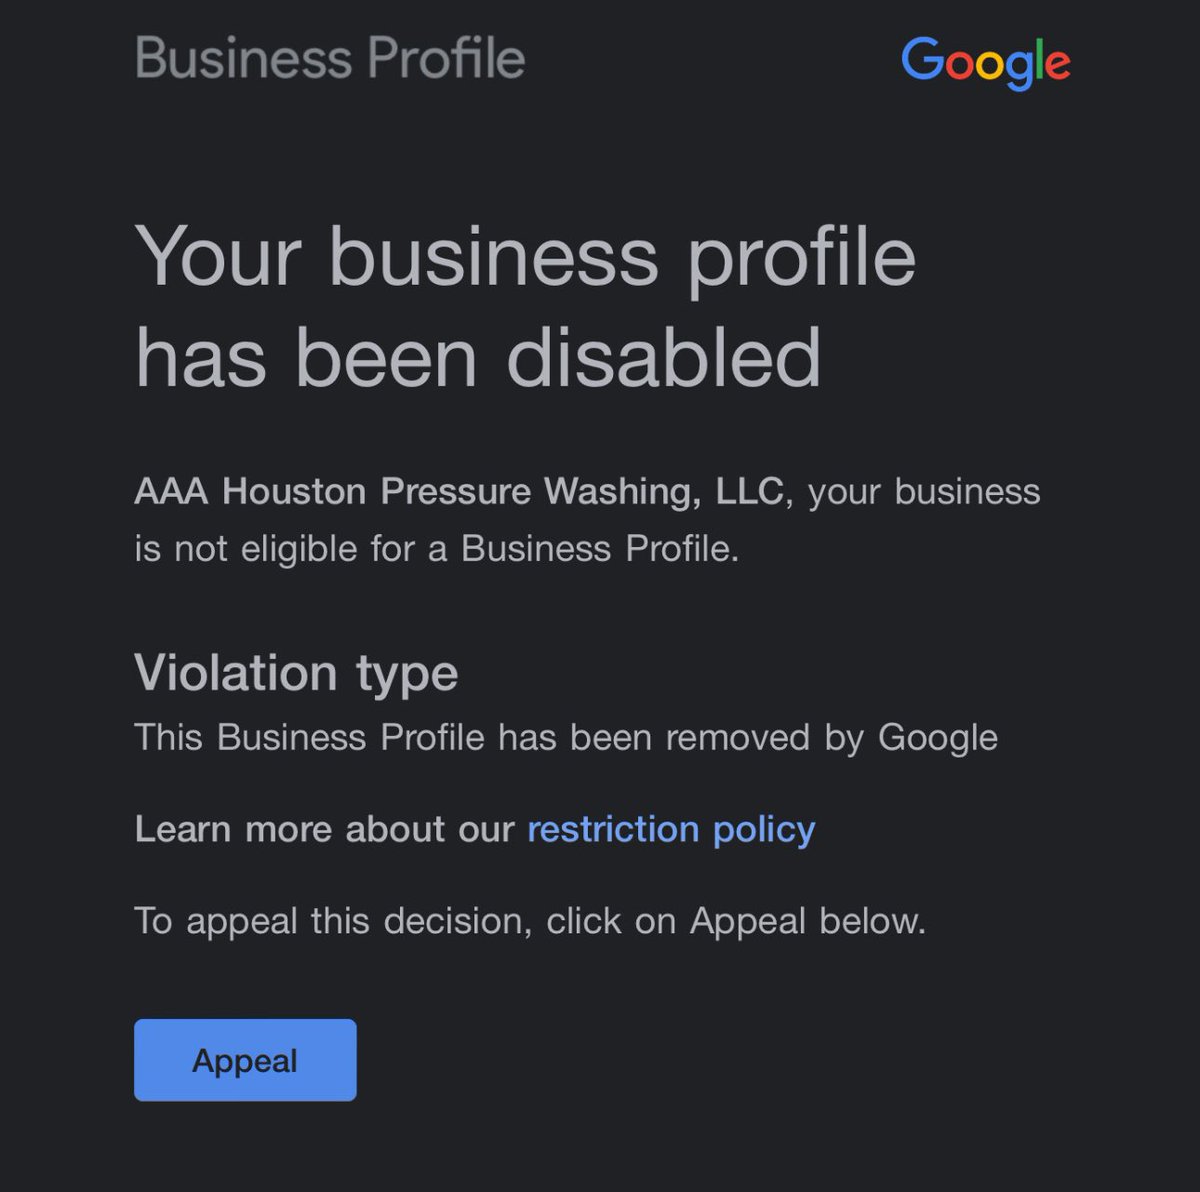 Hey @Google, after months of marketing spam on my phone for your services, now my account is suspended? Where's the fairness in that? Small businesses deserve better treatment. #GoogleMyBusiness #FairnessNeeded